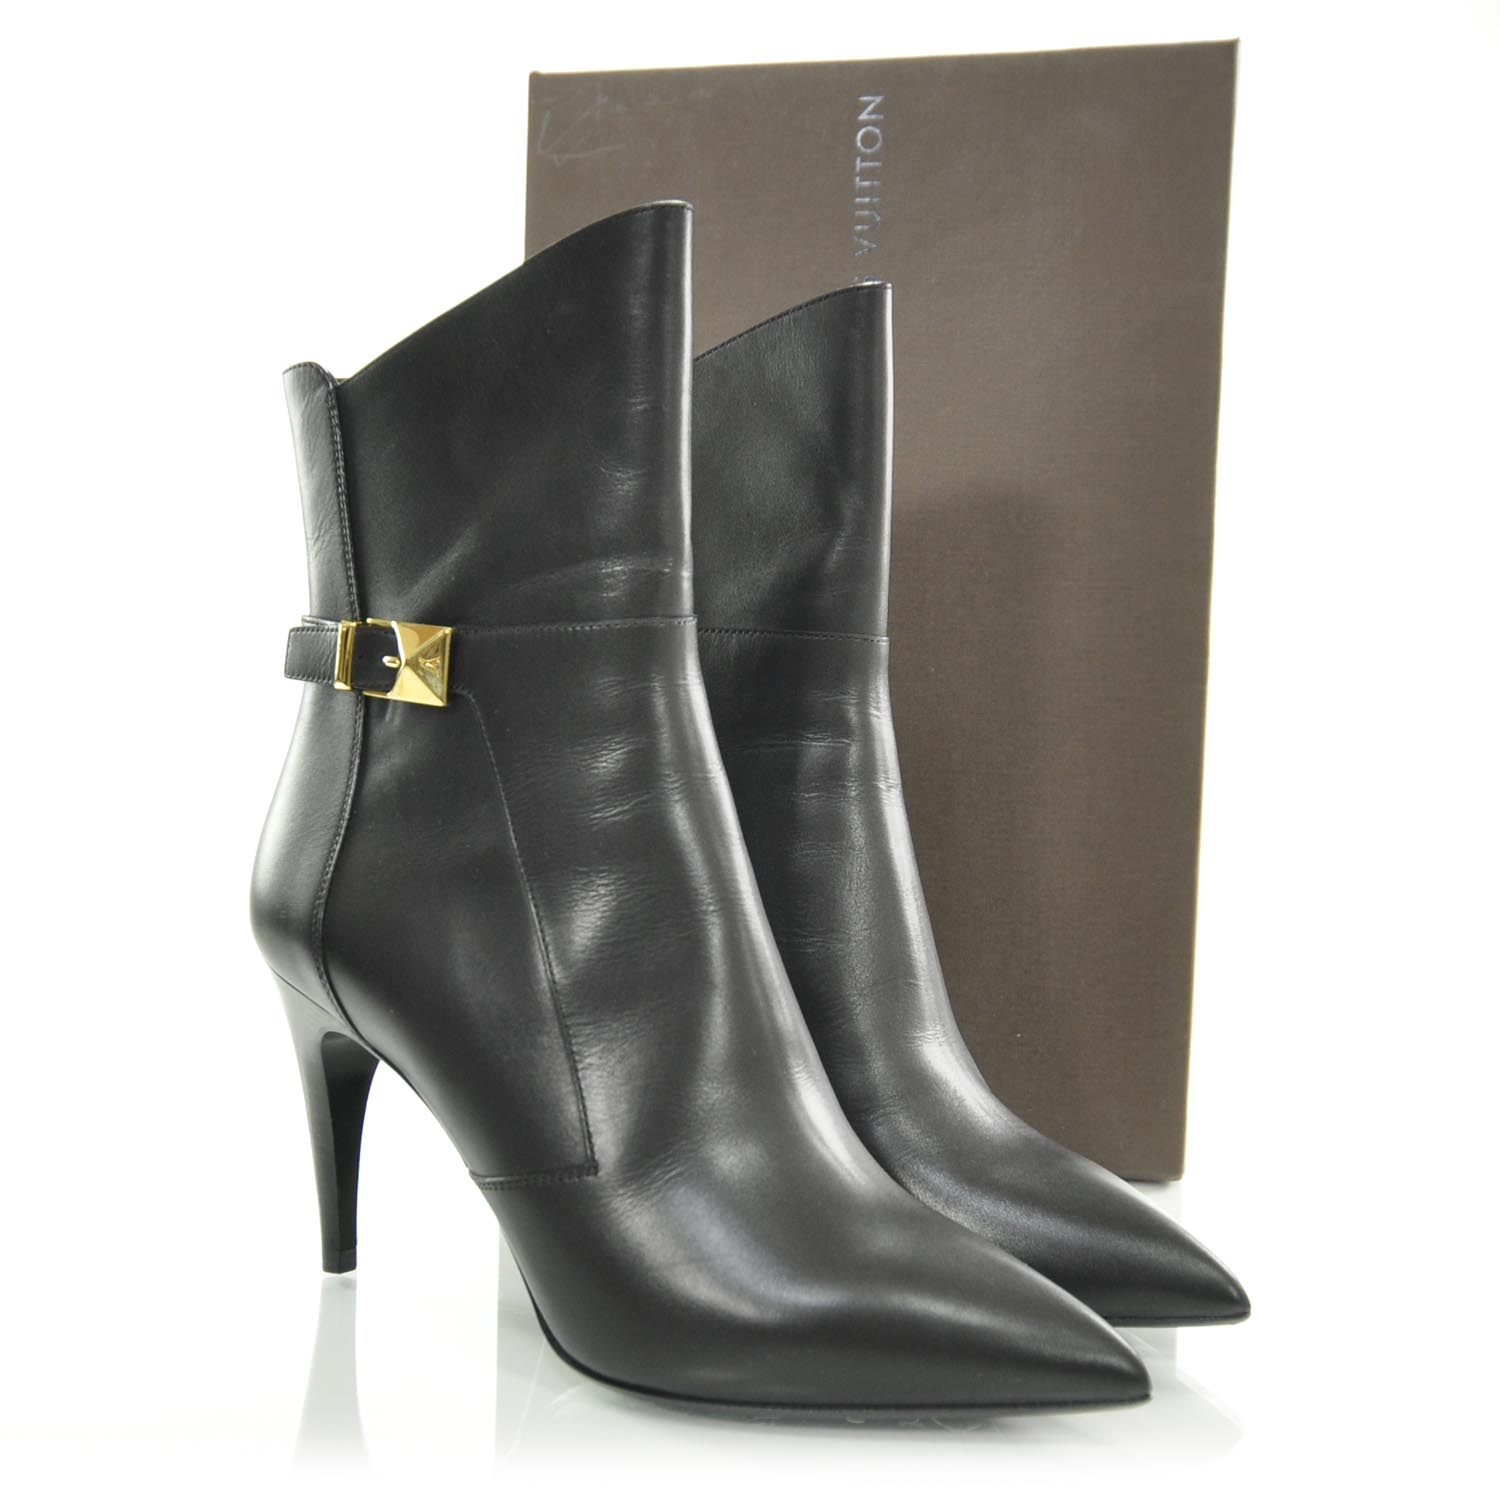 LOUIS VUITTON Leather Black High Heel Ankle Boots 38 28281